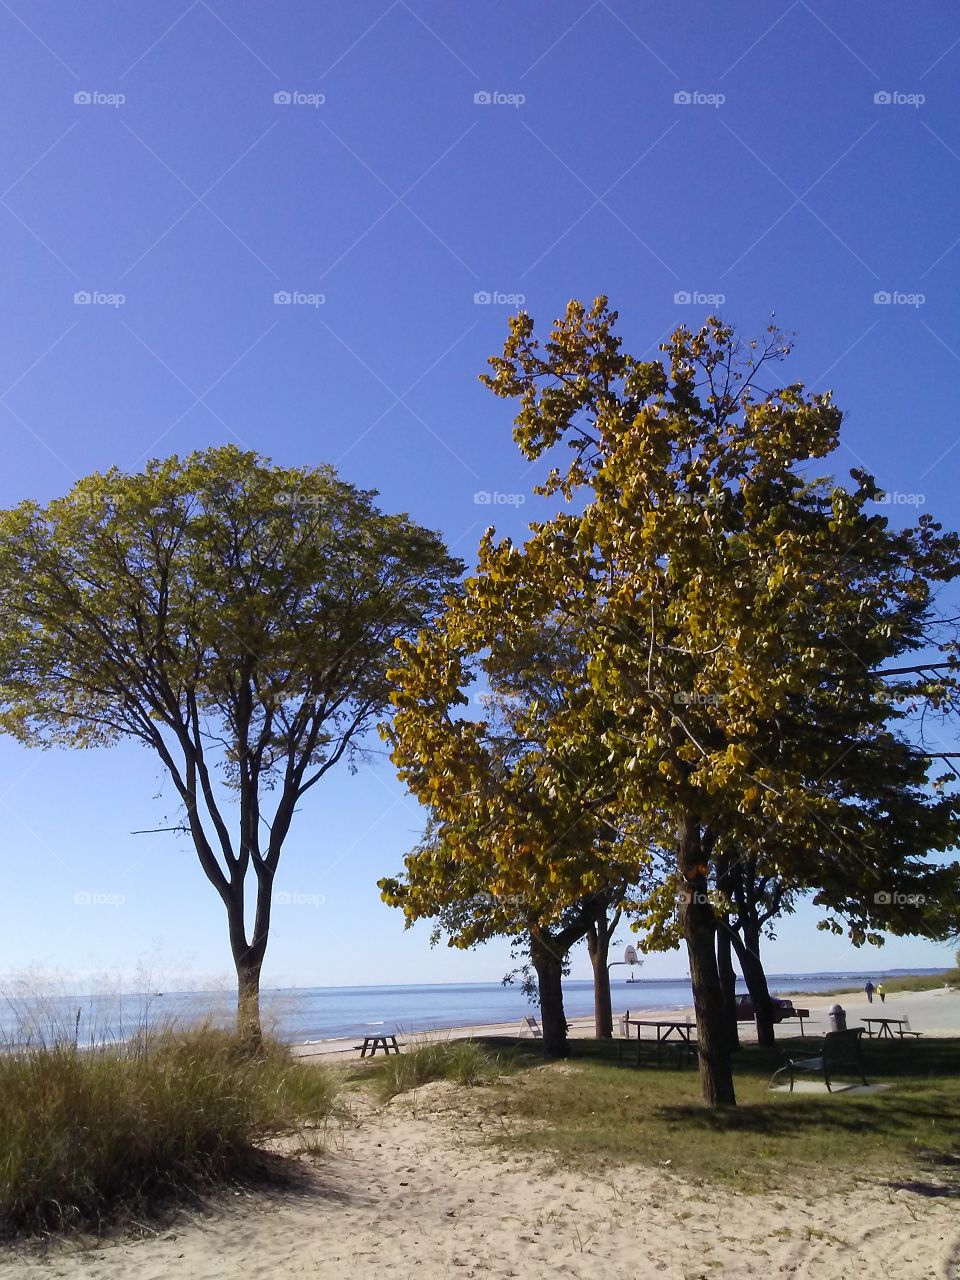 The trees are starting to change color by Neshotah Beach in Two Rivers, Wisconsin.  Lake Michigan in the background.